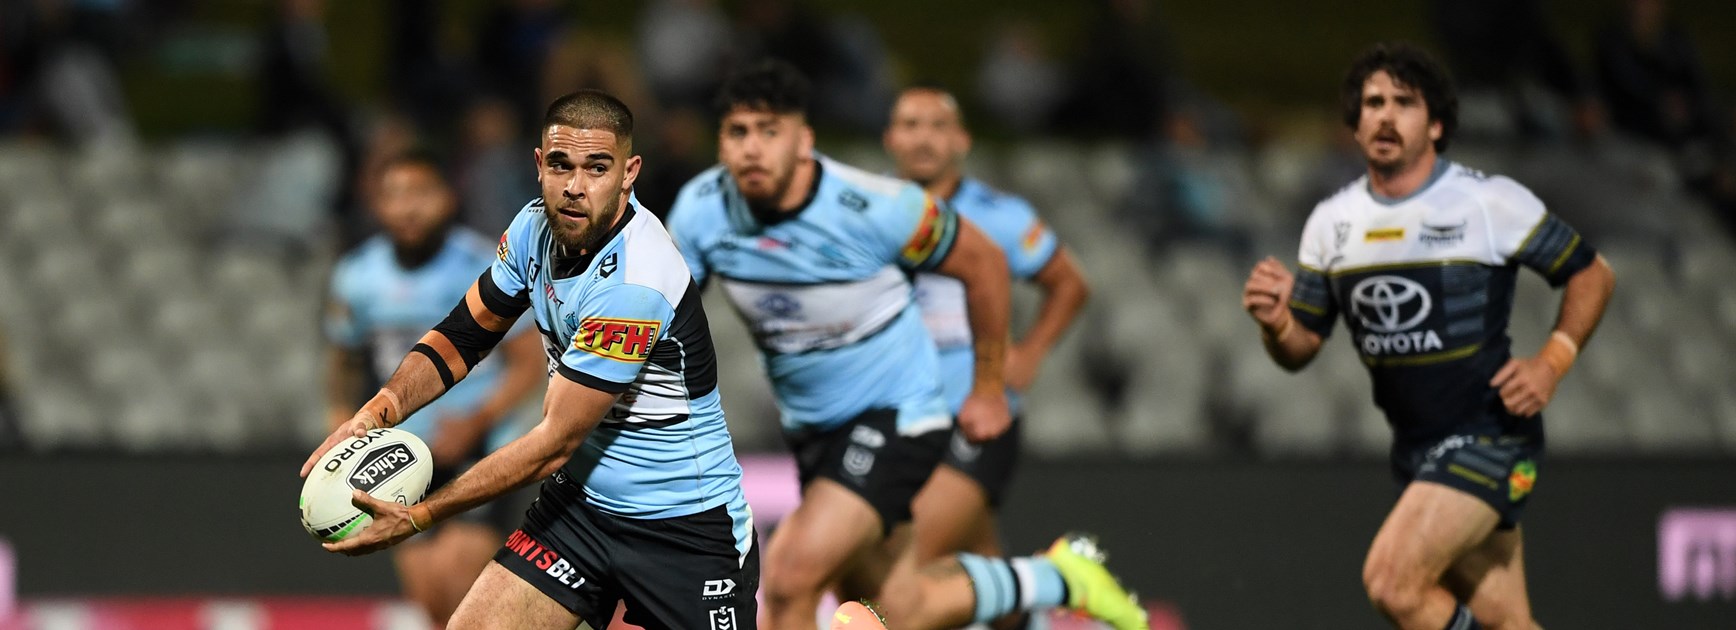 Stat Attack: Kennedy  coming into his own as Sharks No.1